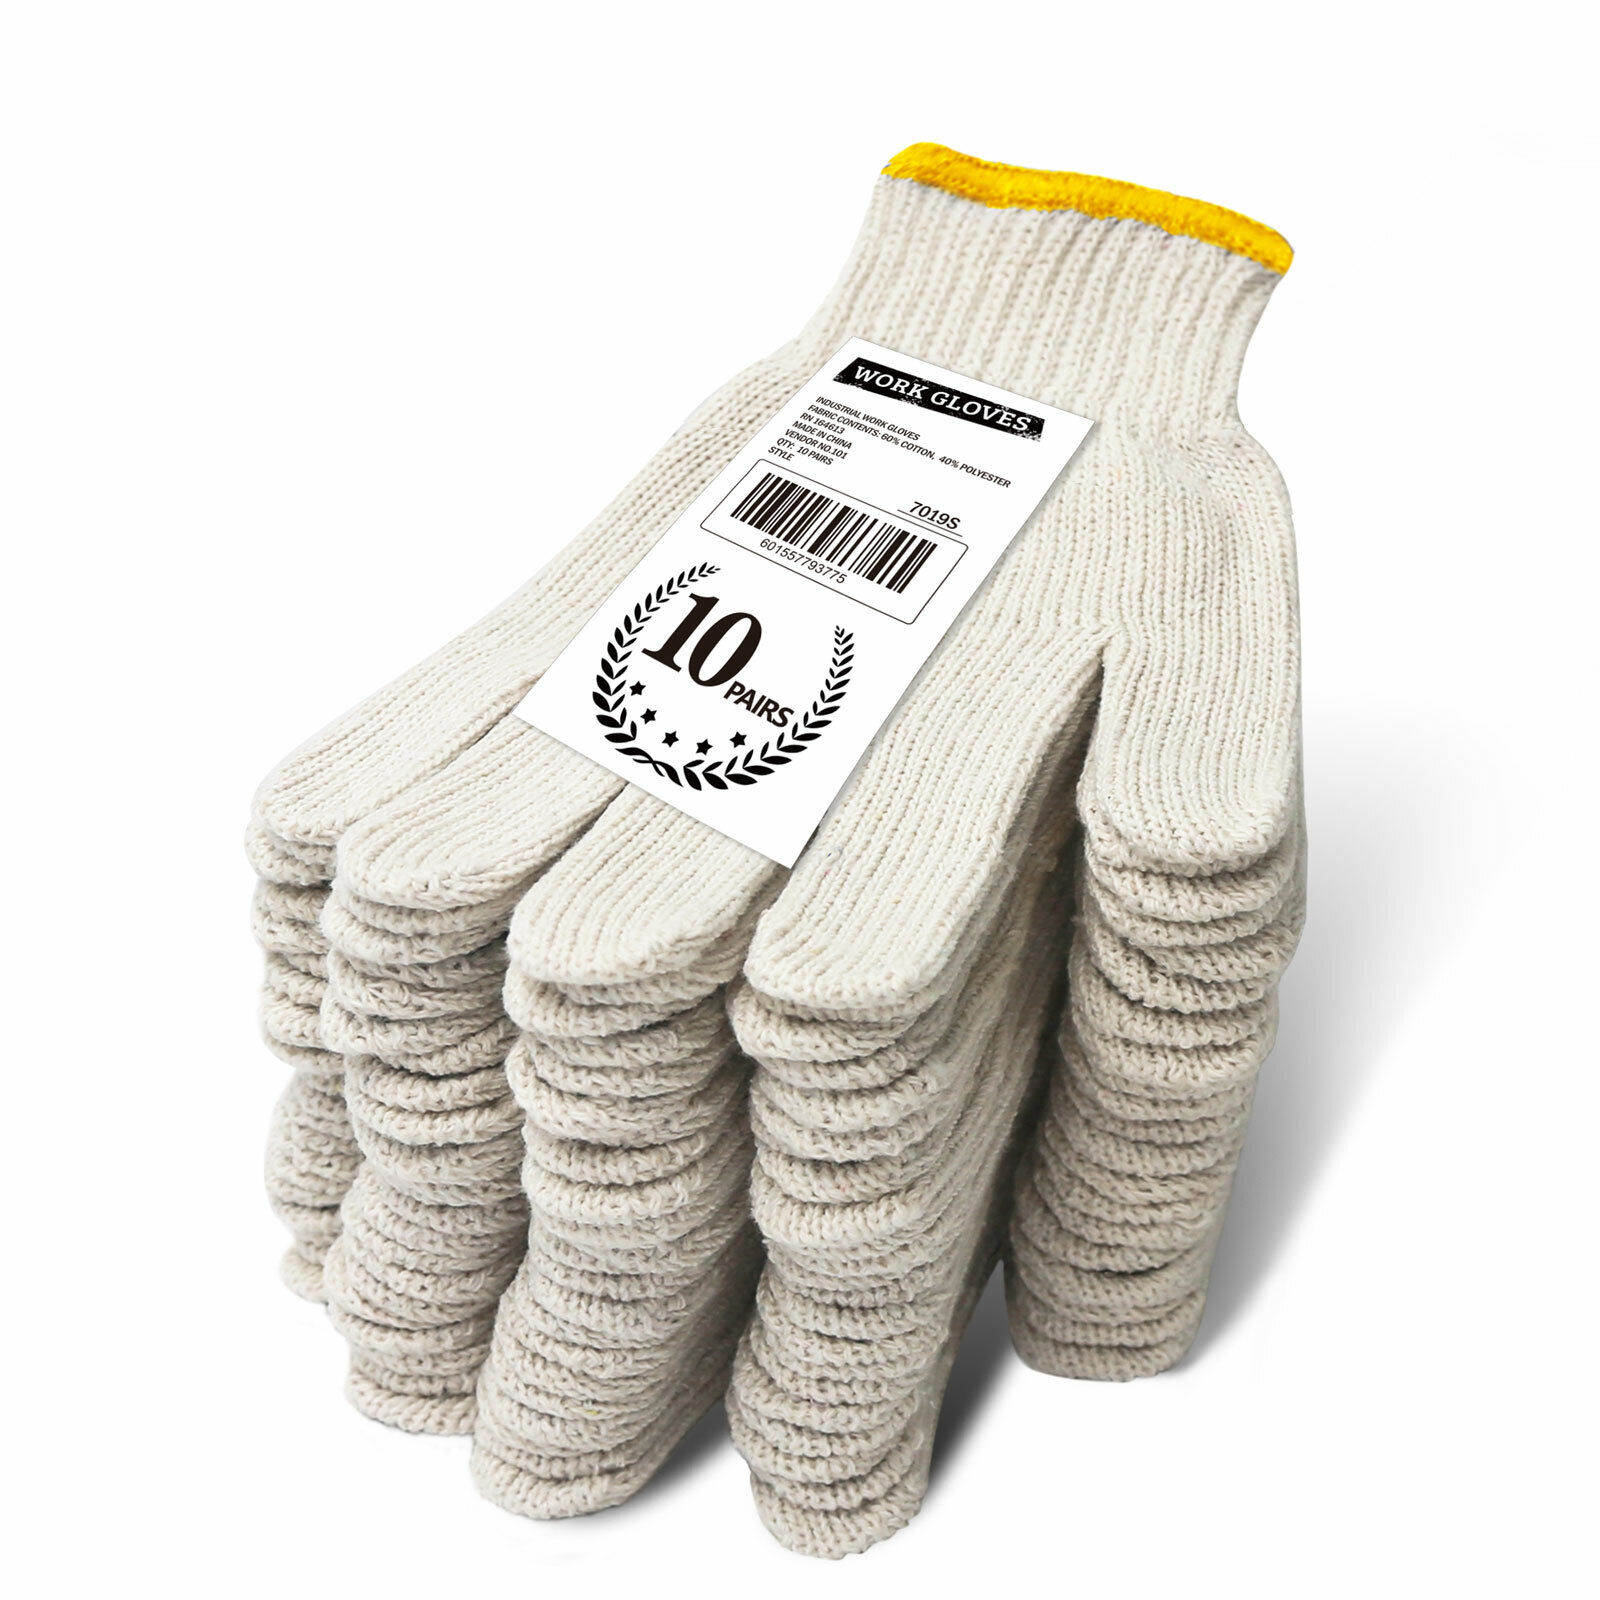 EvridWear 10 Pairs Pack Cotton Polyester String Knit Ultralight Work Gloves